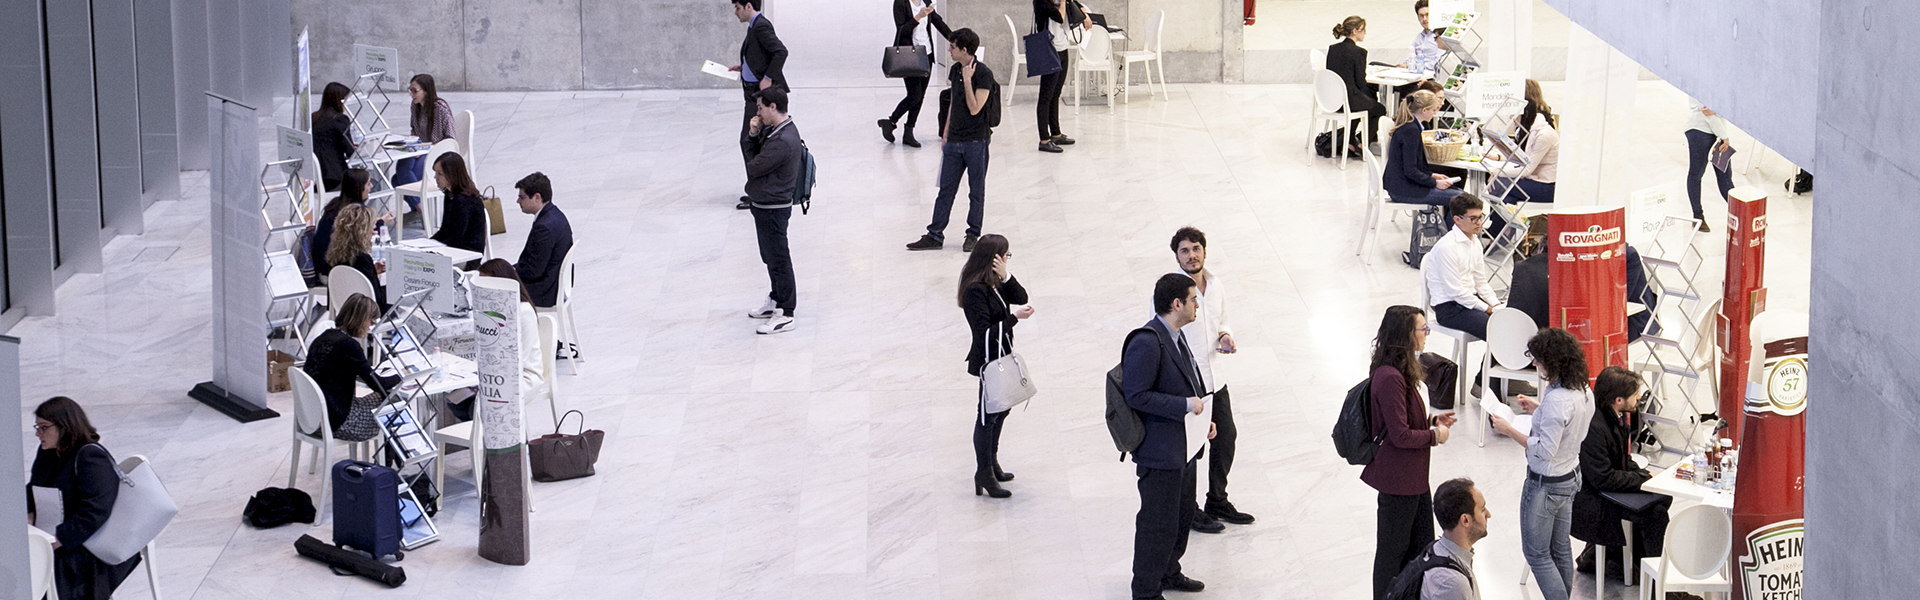 Learn More About the Bocconi Network